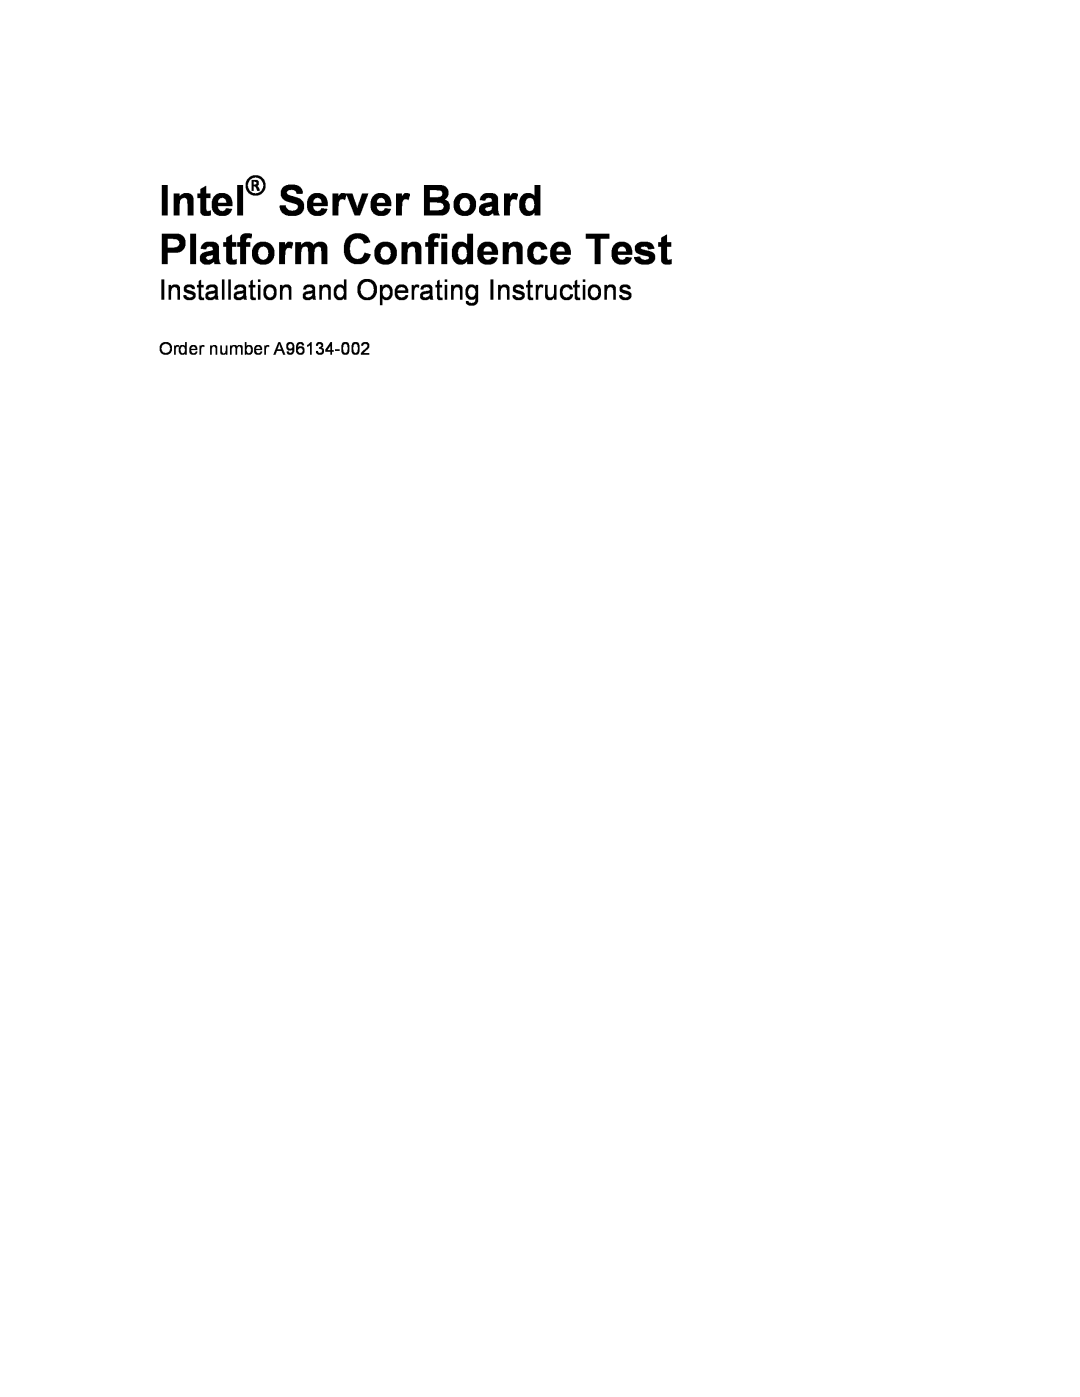 Intel A96134-002 manual Intel Server Board Platform Confidence Test, Installation and Operating Instructions 